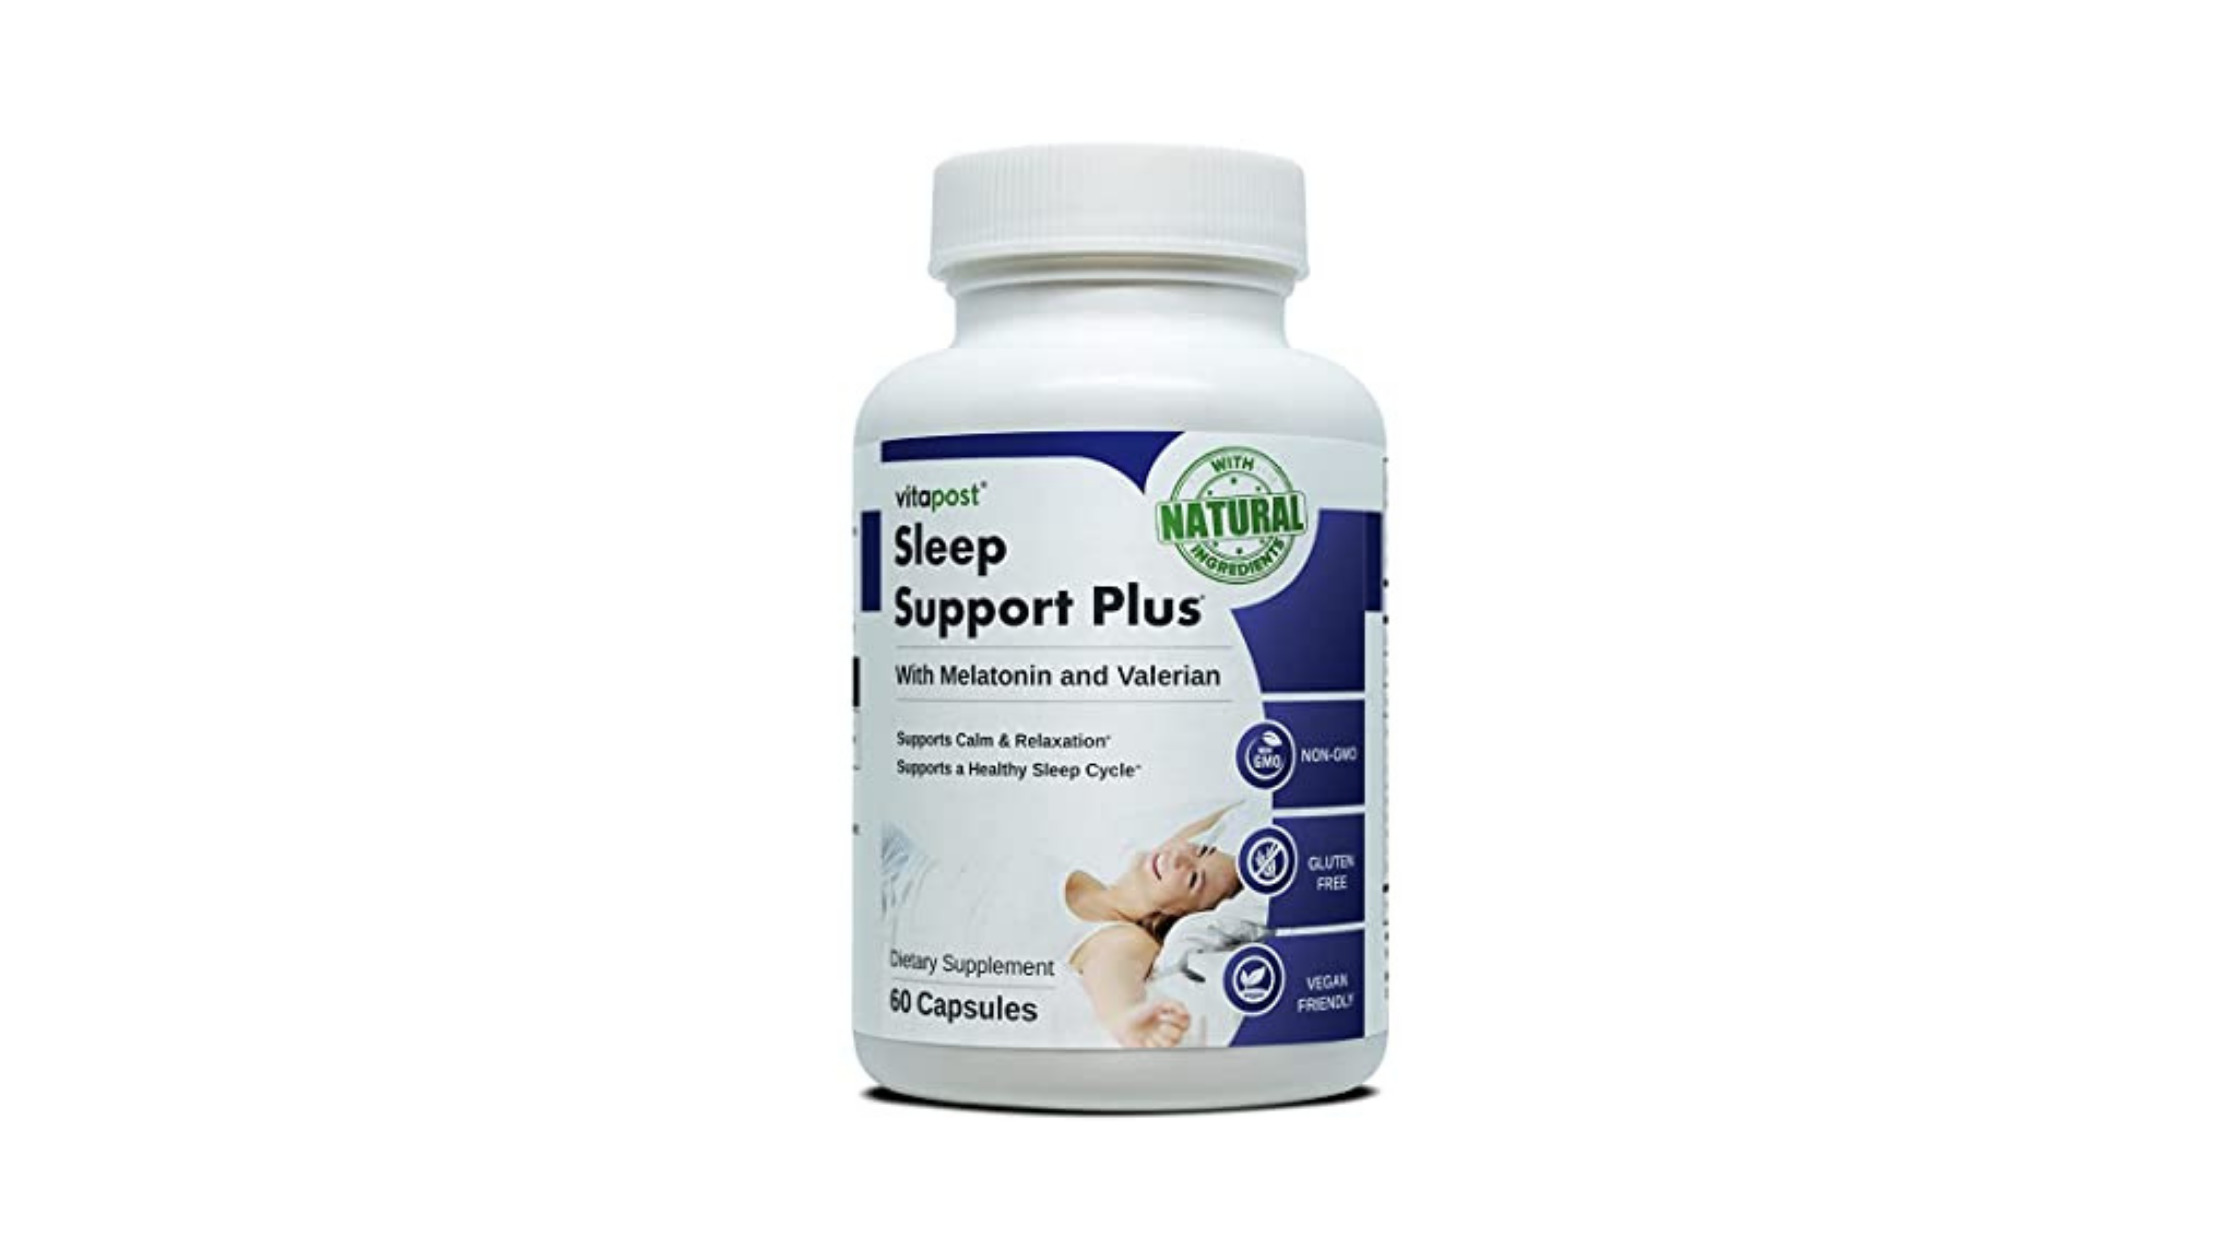 Sleep Support Plus reviews